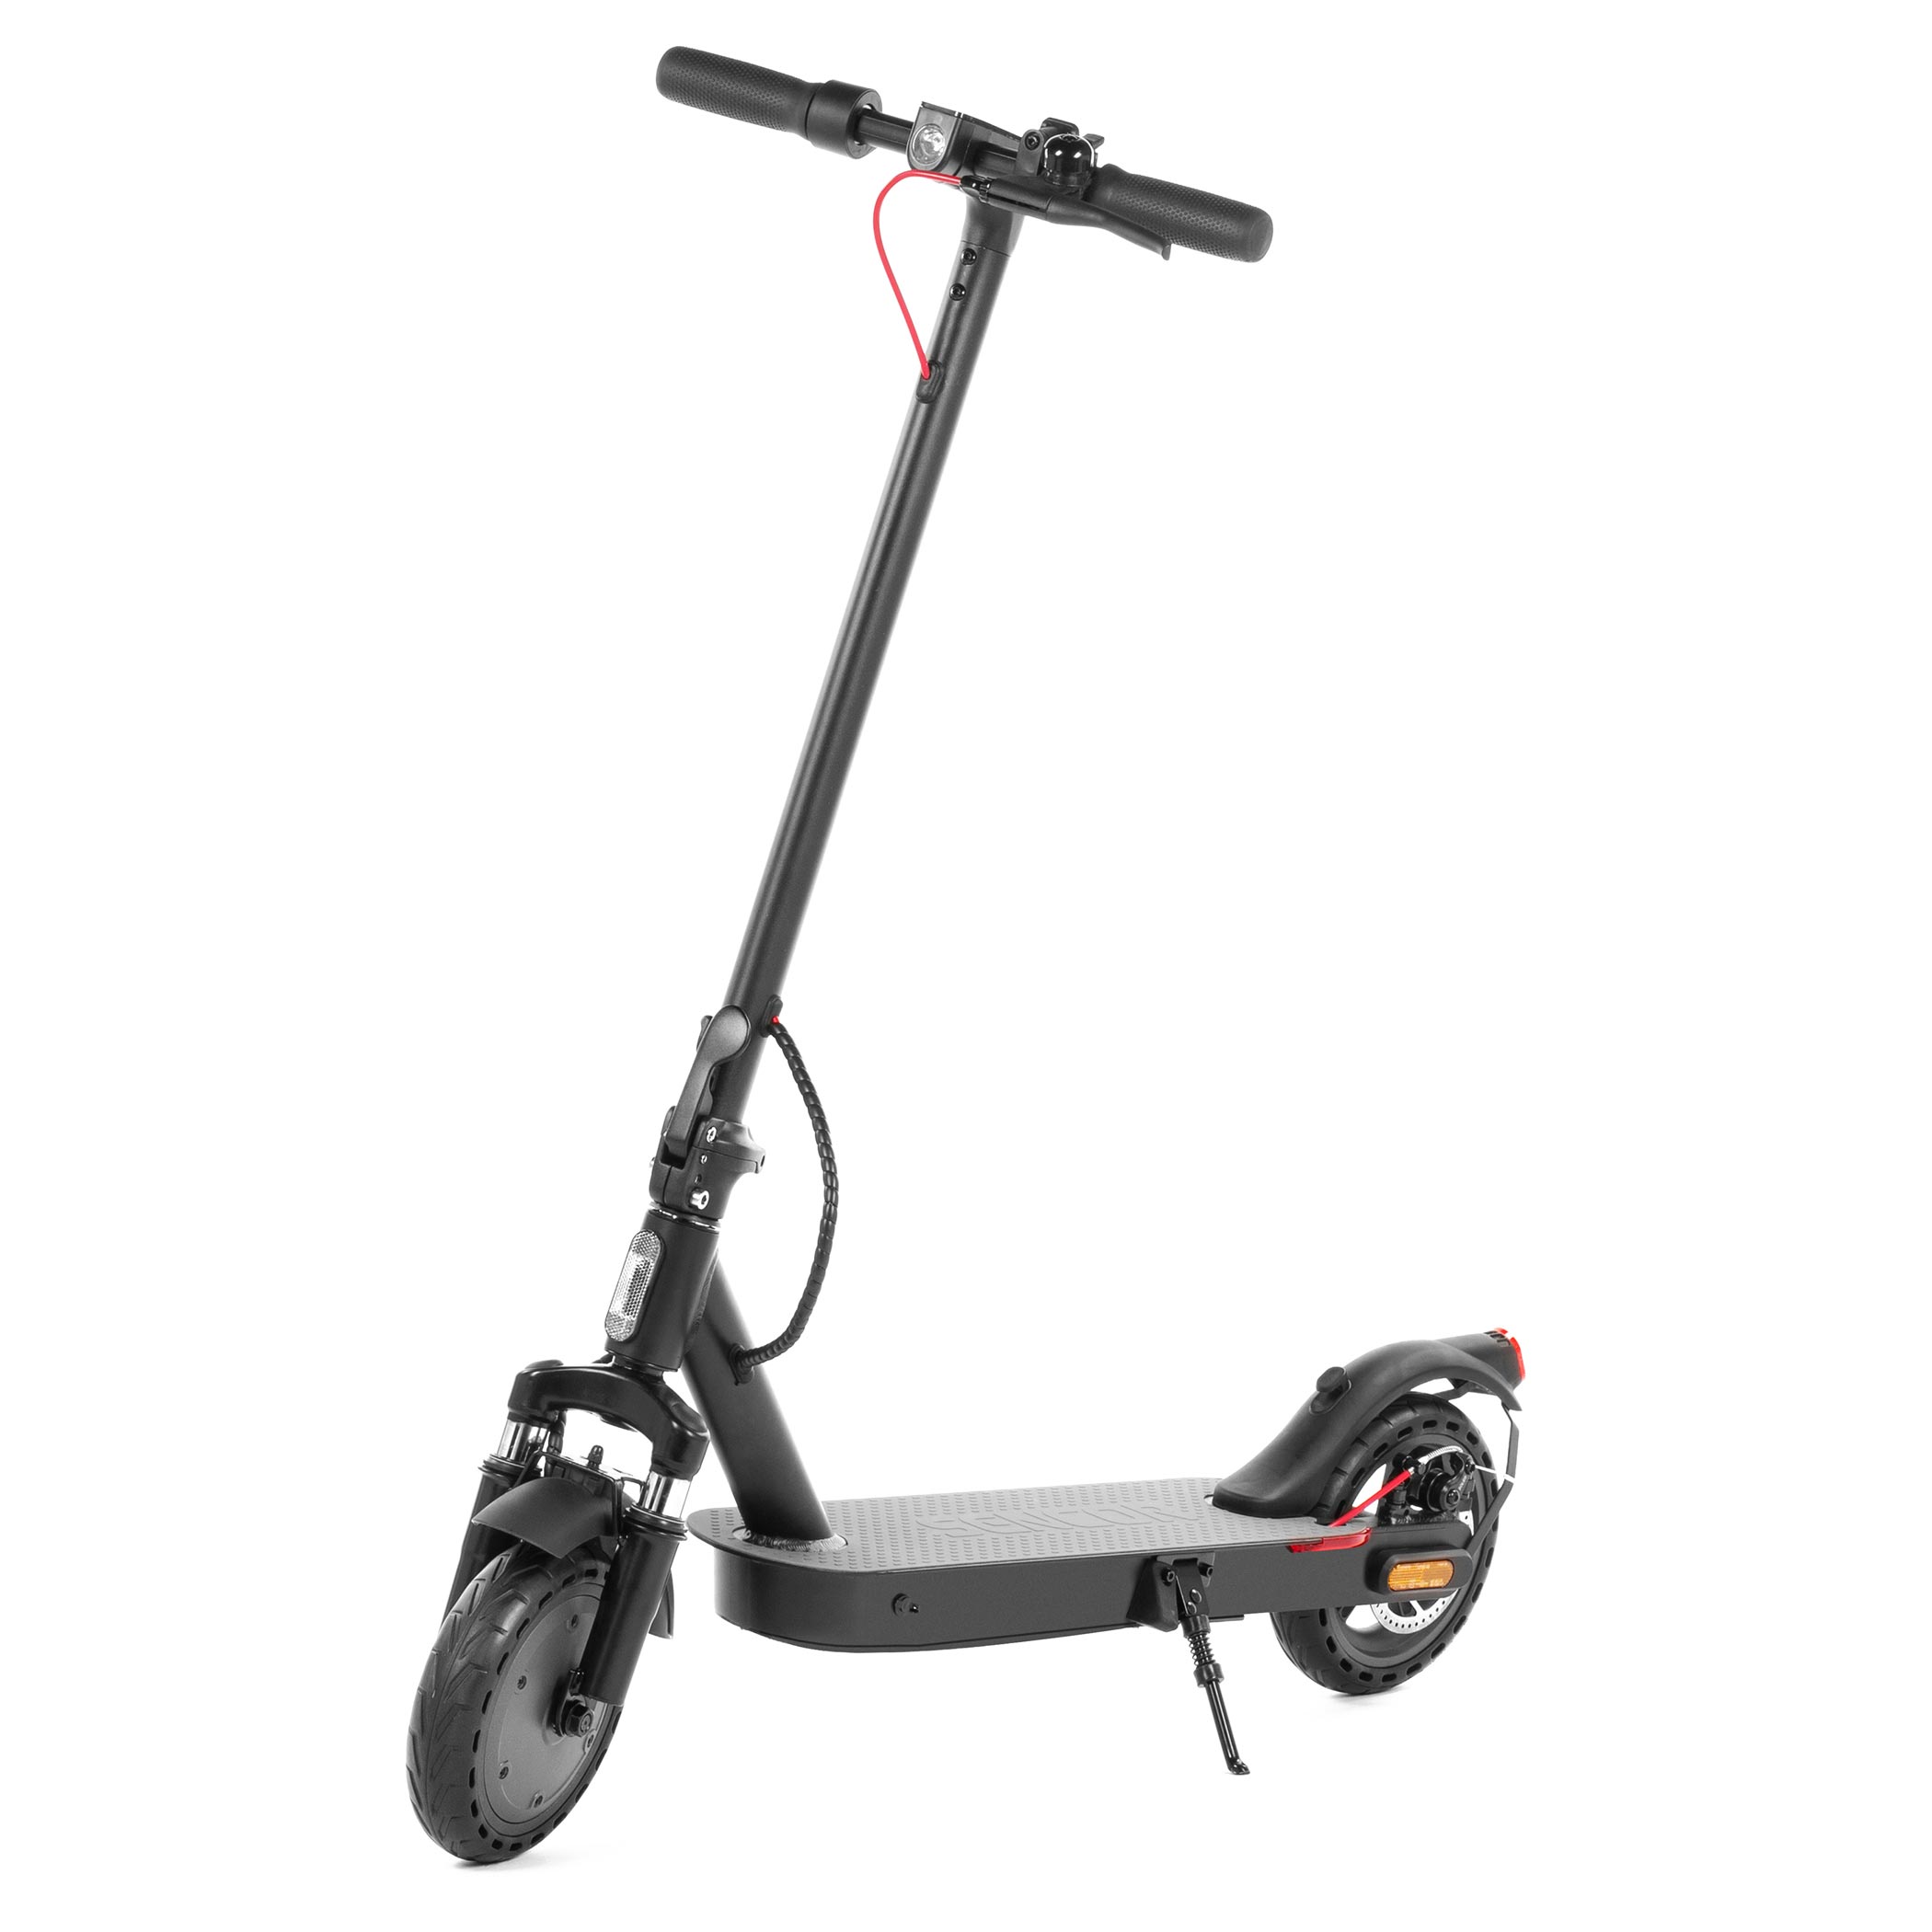 Scooter | SCOOTER S30 | Sencor